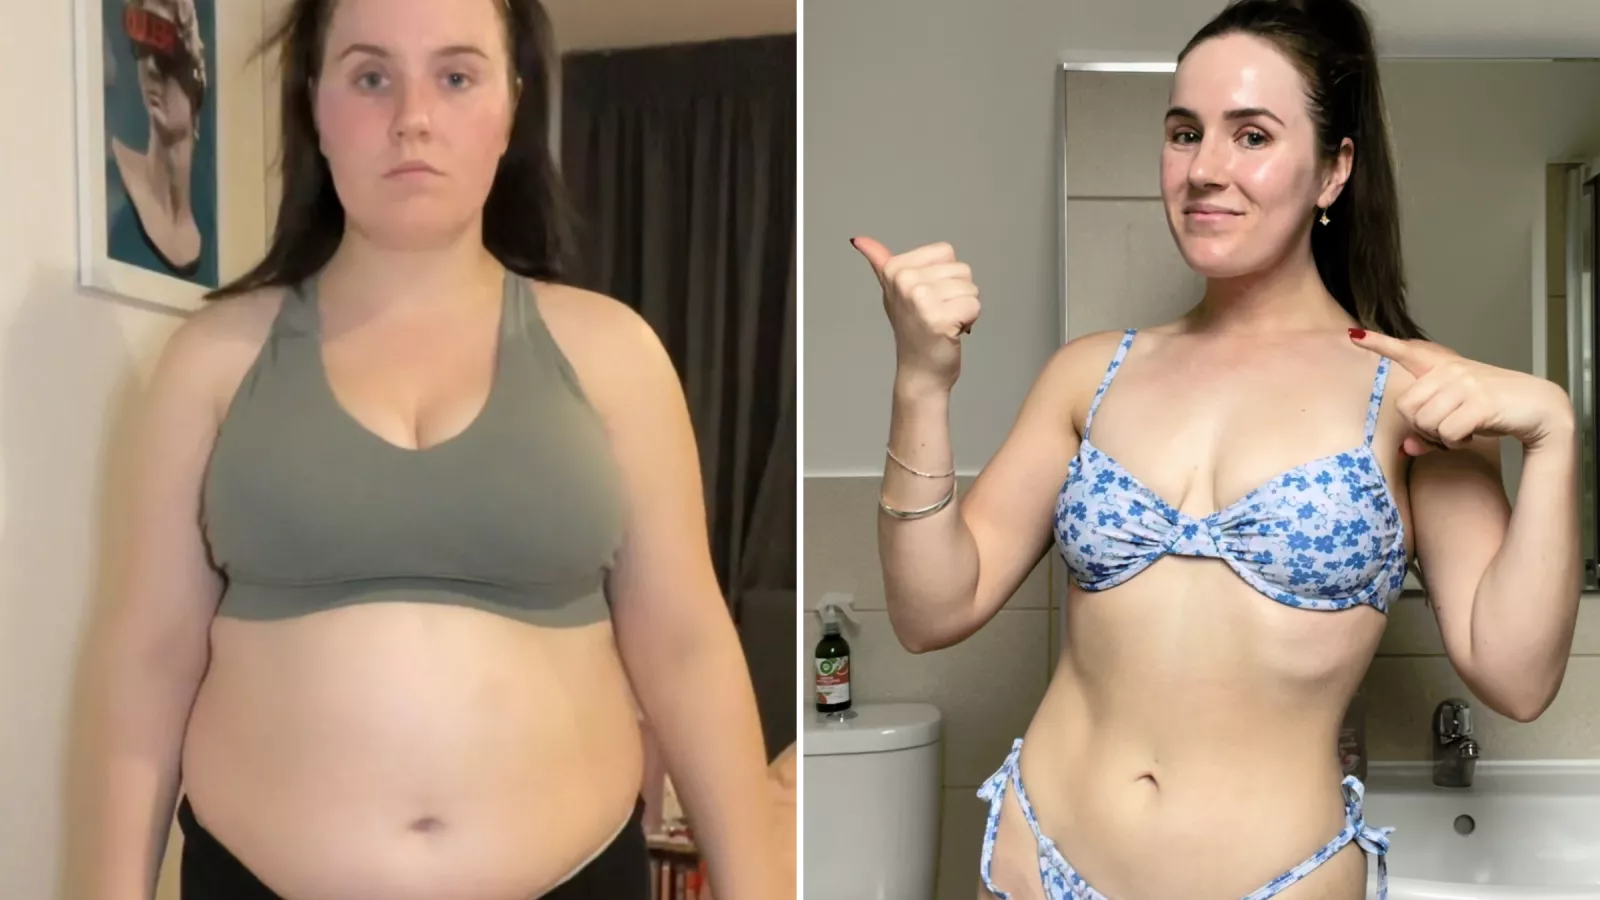 Woman Shocks the Internet With Her Four-Month Weight Loss Transformation